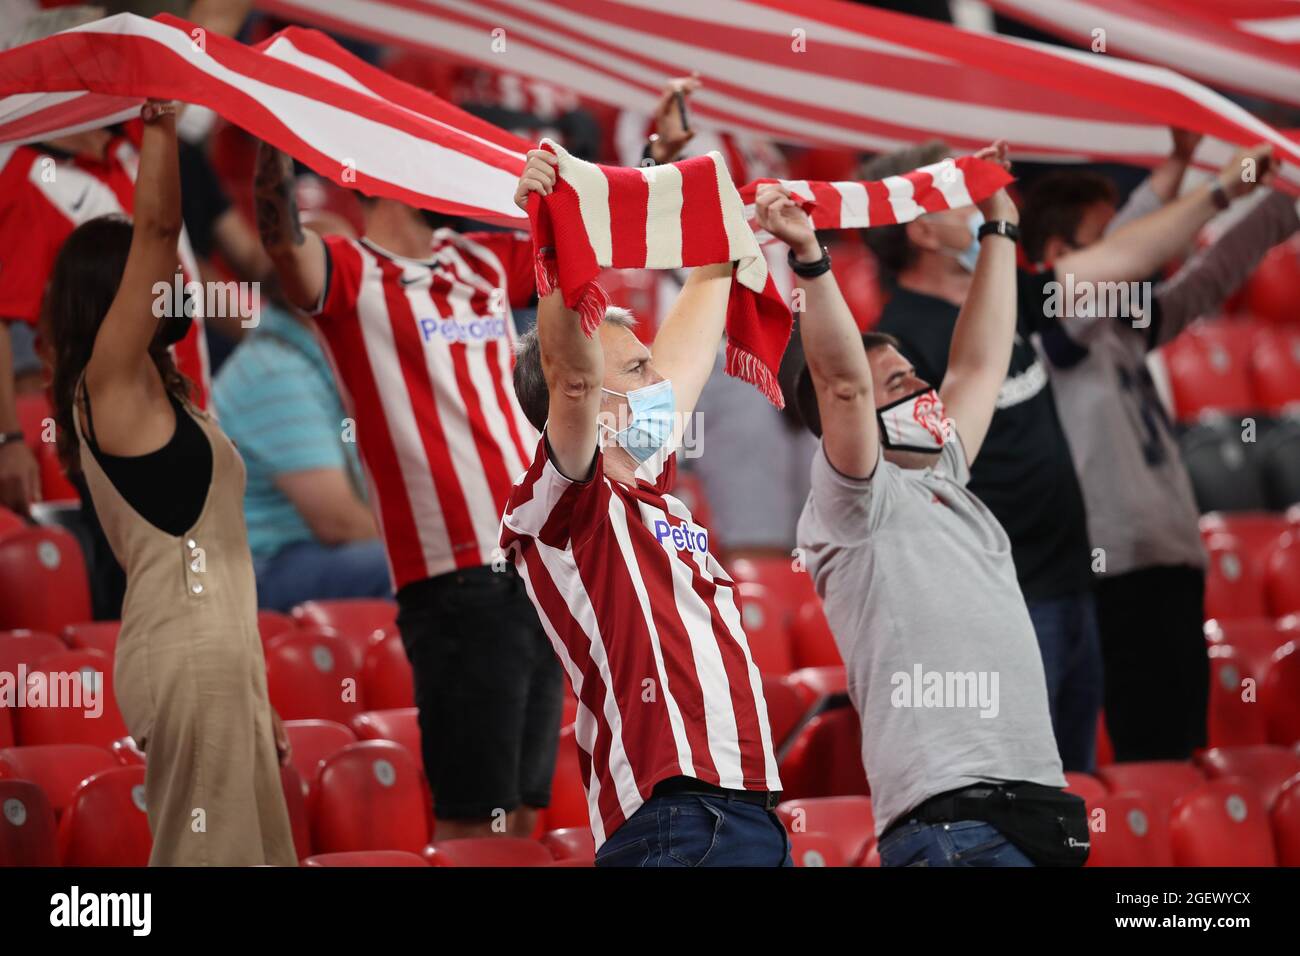 Supporters during the Liga match between Athletic Club de Bilbao and FC Barcelona at Estadio de San Mames in Bilbao, Spain. Stock Photo